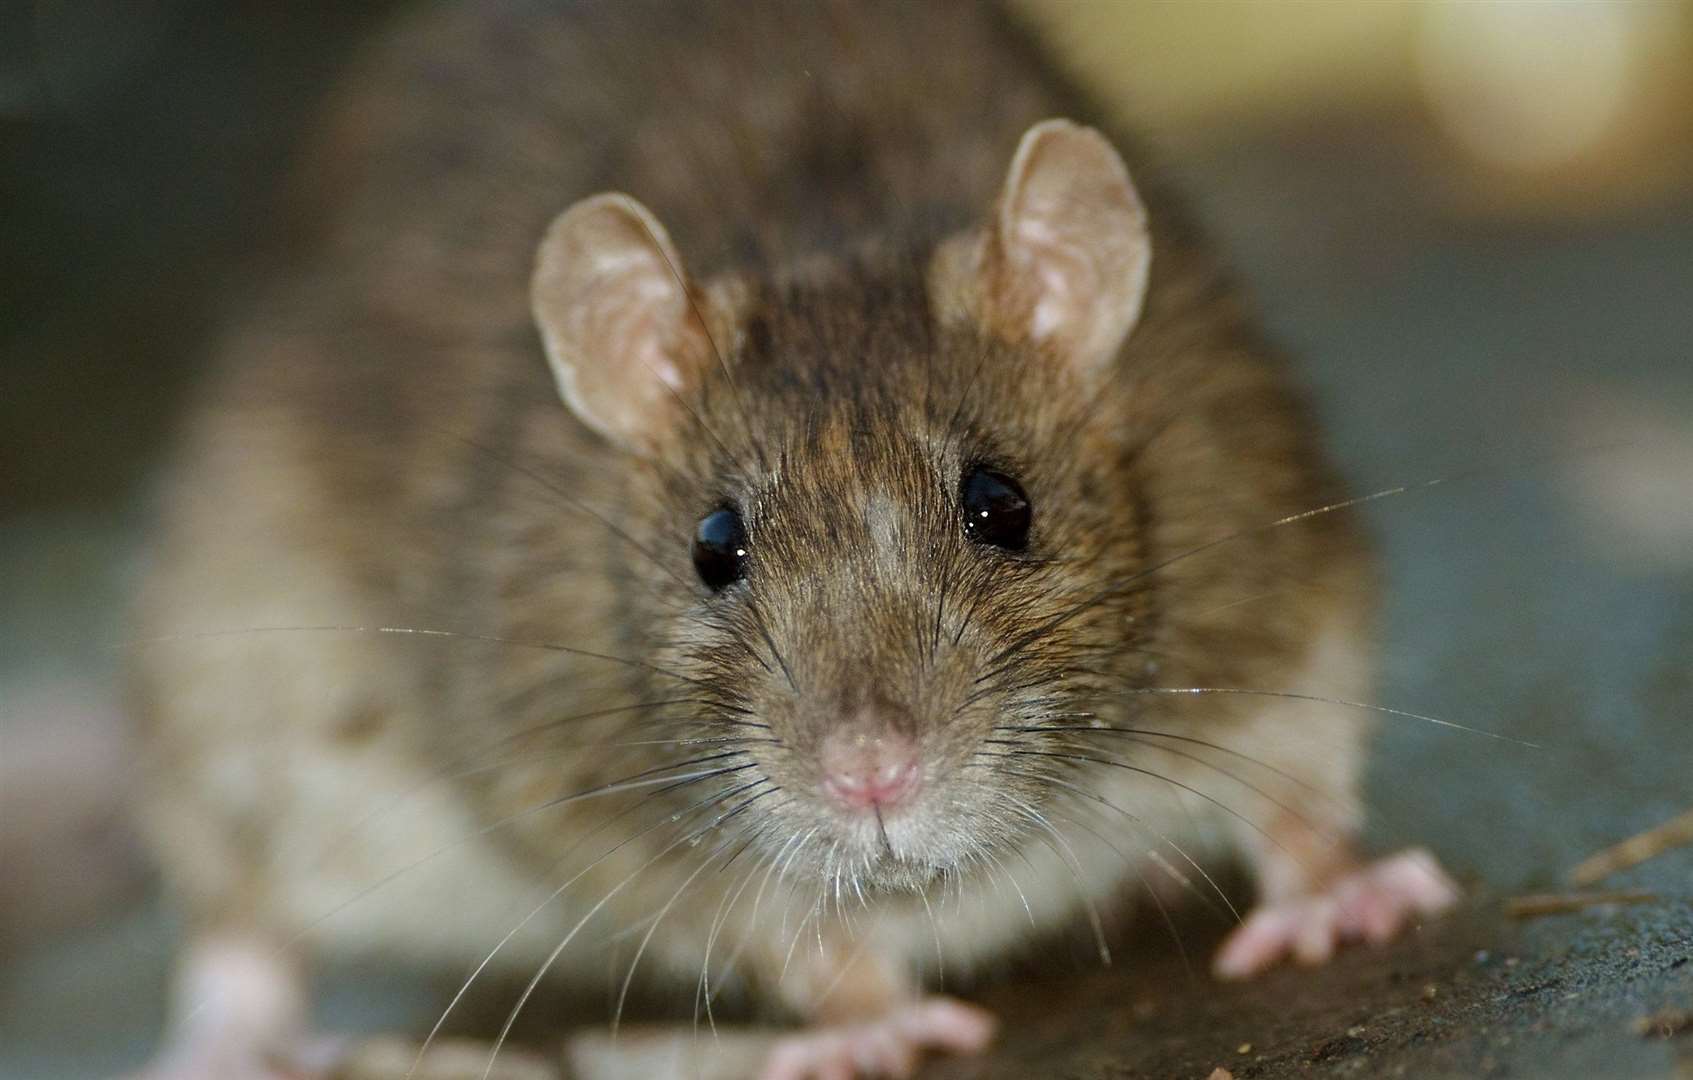 The rat was spotted scurrying across the ward (stock picture)